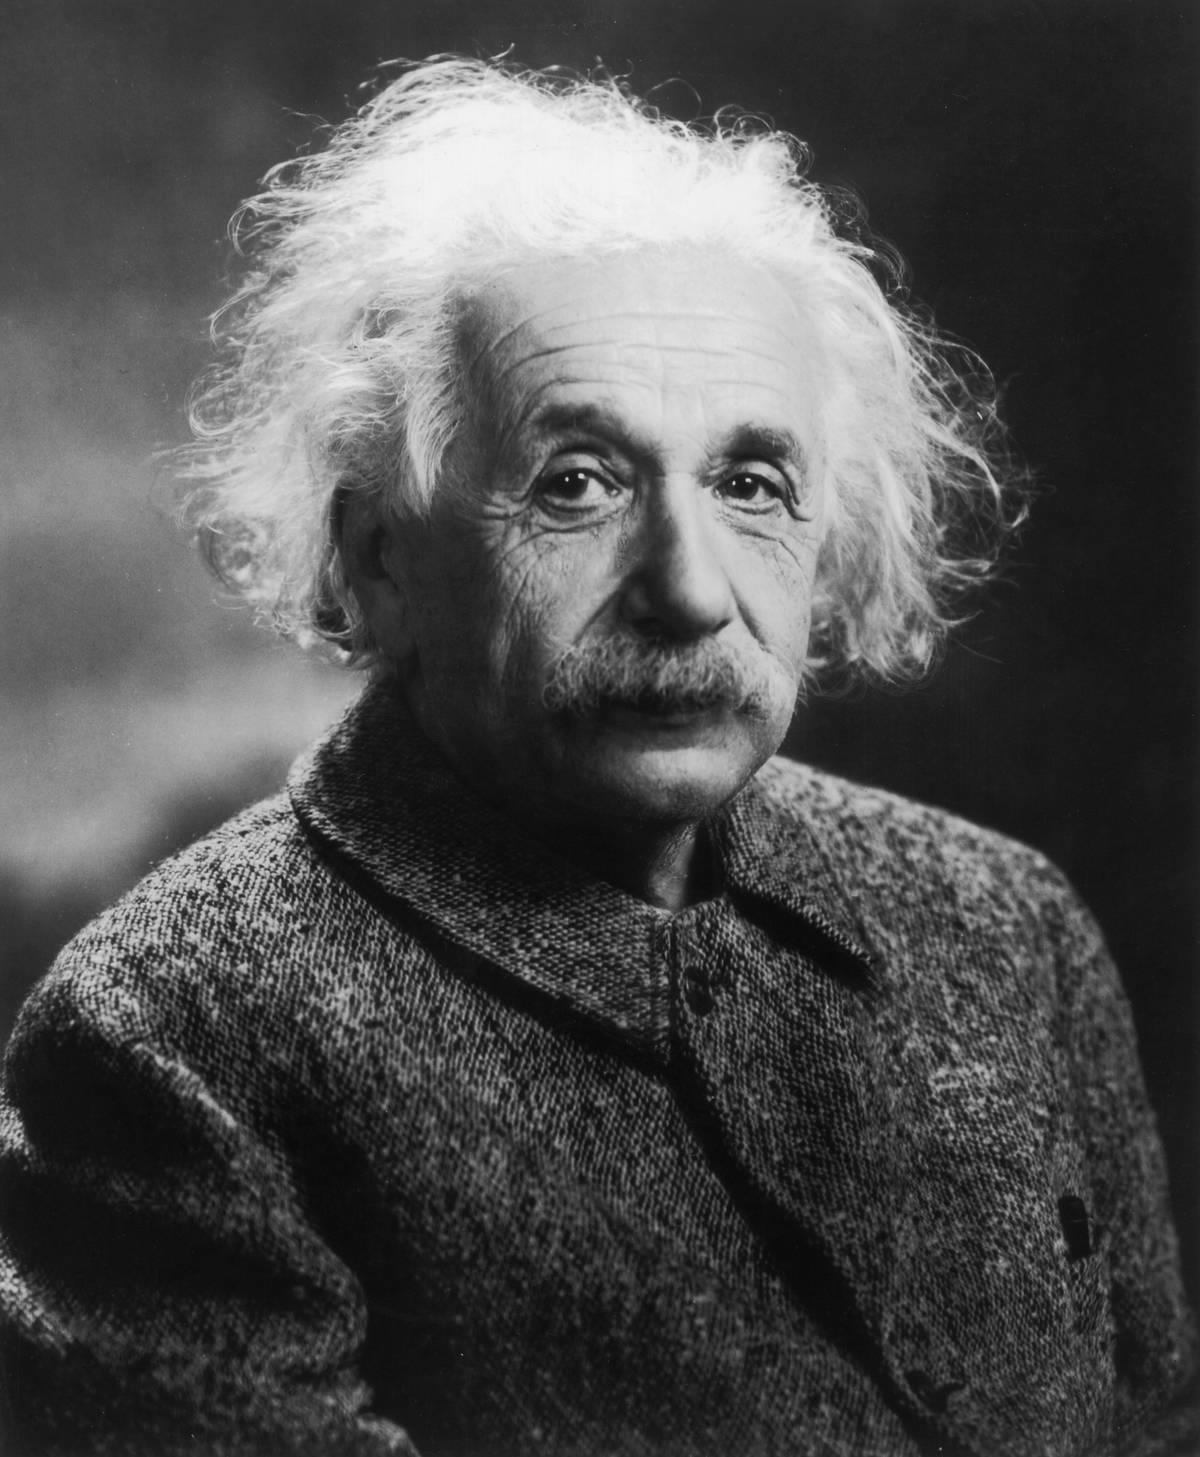 <p>Einstein's most famous theory is the General Theory of Relativity. This theory made history when he published it in 1915. At the time he made the groundbreaking realization t that the speed of light is a constant and that the law of physics always maintain the same form. The theory also became a theory of gravity. The basic idea says that<b> planets </b>bend space and time around themselves. Things fall towards the ground because they're actually falling towards the middle of the Earth. The Earth is pulling space-time toward itself</p> <p>To us today, these statements may sound logical but without the scientific tools, we have today to hypothesize,test, and understand how the world worked. it was revolutionary. These theories provided the foundation upon which the concepts of space and time were eventually built. We are still building on his theories in science today.</p> <p>Are you still searching for your life purpose? You won't believe what the science of <b><a href="https://video.numerologist.com/mesl_v1.5/aff-dt.php?hop=hpfacebook&utm_source=hpfacebook&utm_medium=affiliate" rel="noopener noreferrer">Numerology</a></b> can reveal about you!</p> <p>That's right, the <a href="https://video.numerologist.com/mesl_v1.5/aff-dt.php?hop=hpfacebook&utm_source=hpfacebook&utm_medium=affiliate" rel="noopener noreferrer"><b>numerology of your birth date</b>,</a> regardless of what month you were born, can reveal surprising information about your personality.</p>